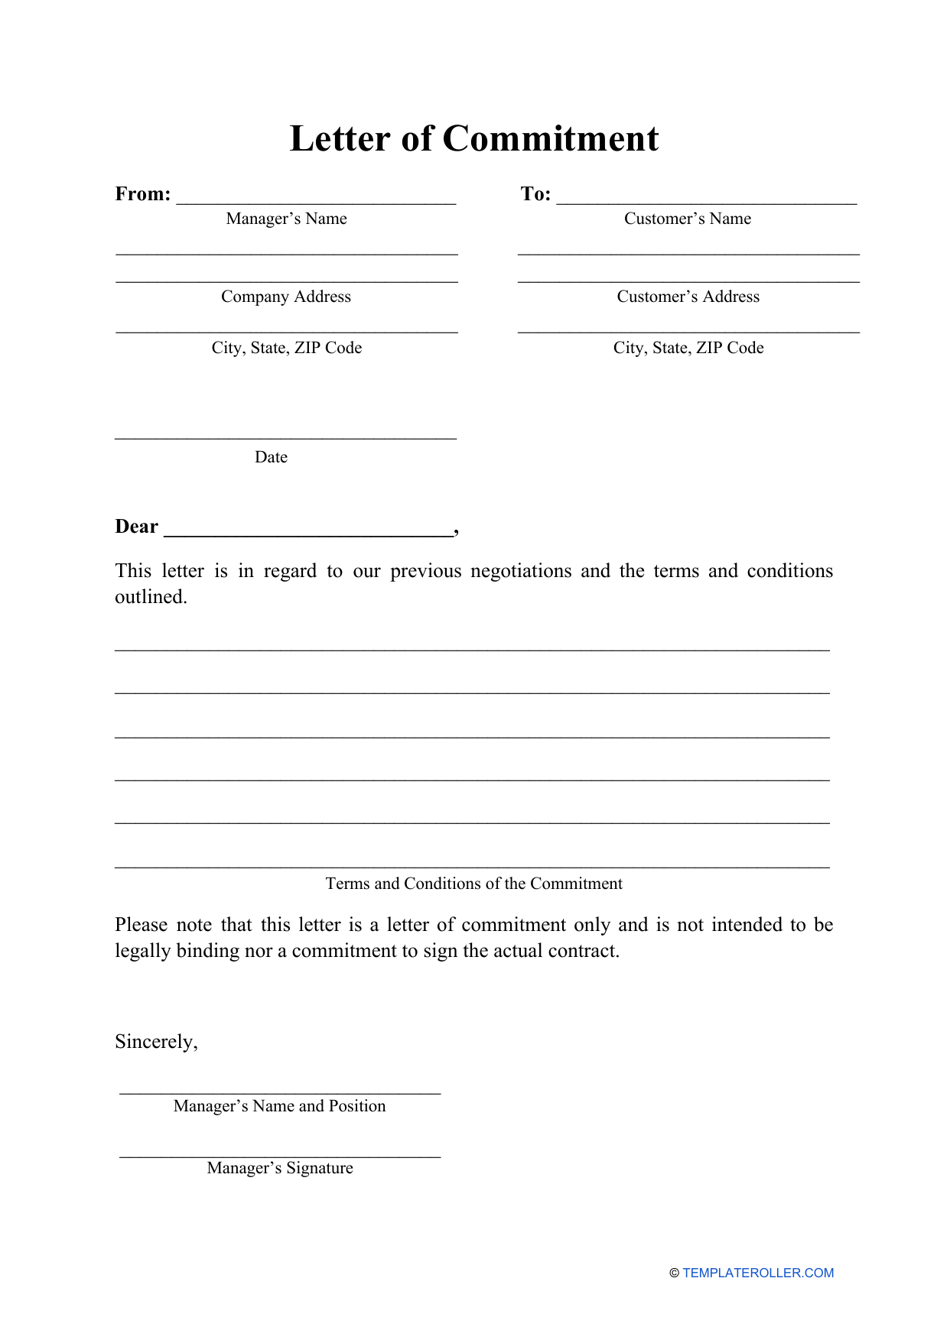 Letter of Commitment Template Download Printable PDF Templateroller